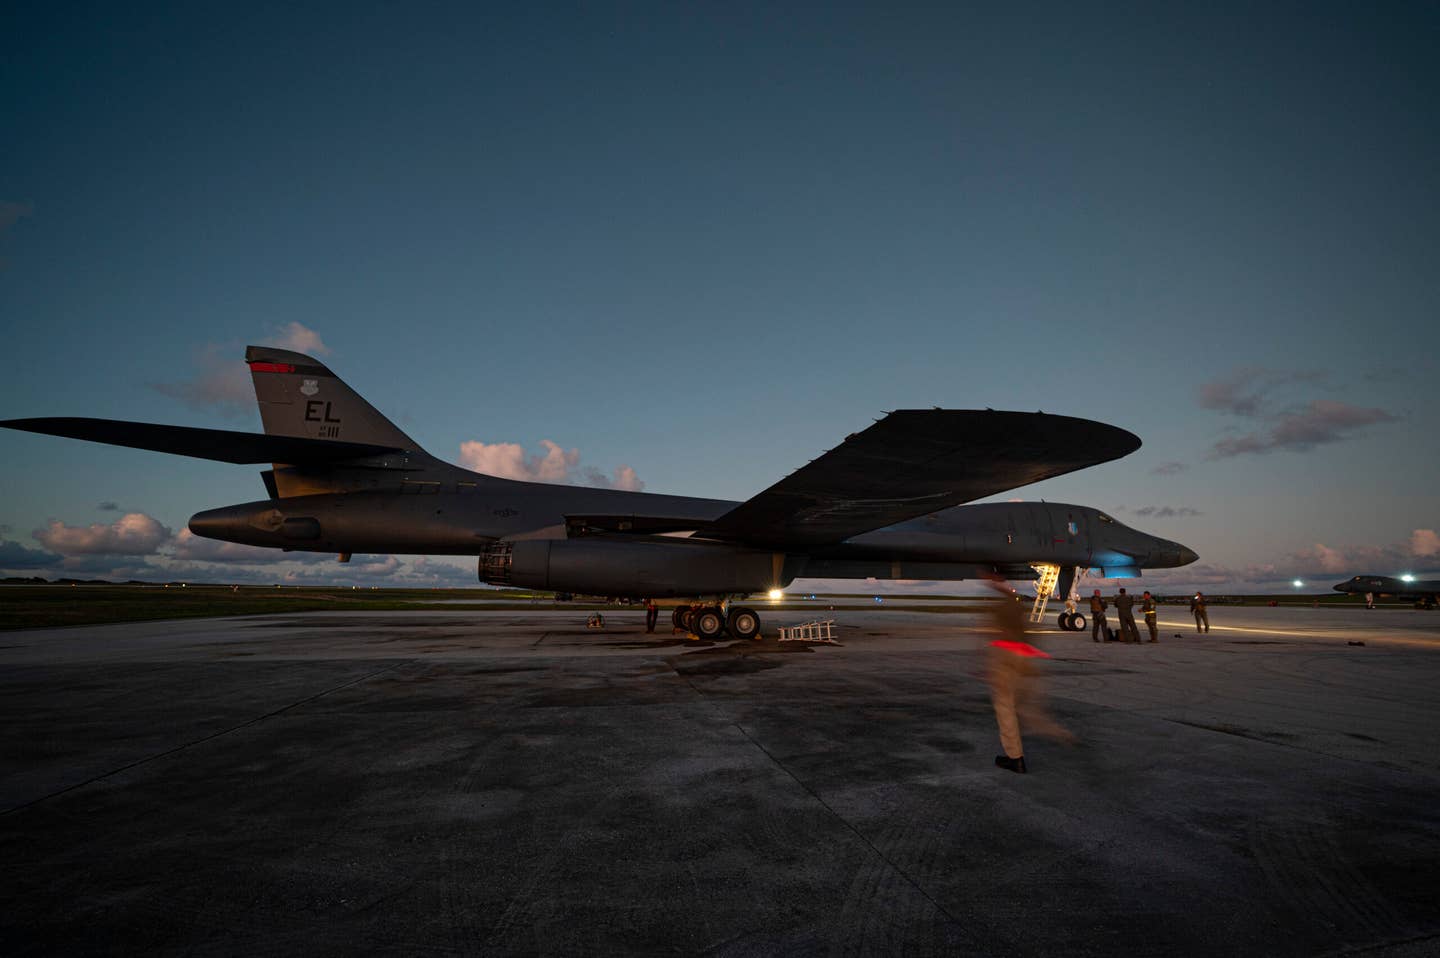 Aircrew assigned to the 34th Bomb Squadron, Ellsworth Air Force Base, discuss their B-1B mission upon returning from a Bomber Task Force integration mission in the Indo-Pacific region at Andersen Air Force Base, June 6, 2022. <em>U.S. Air Force photo by Master Sgt. Nicholas Priest</em>